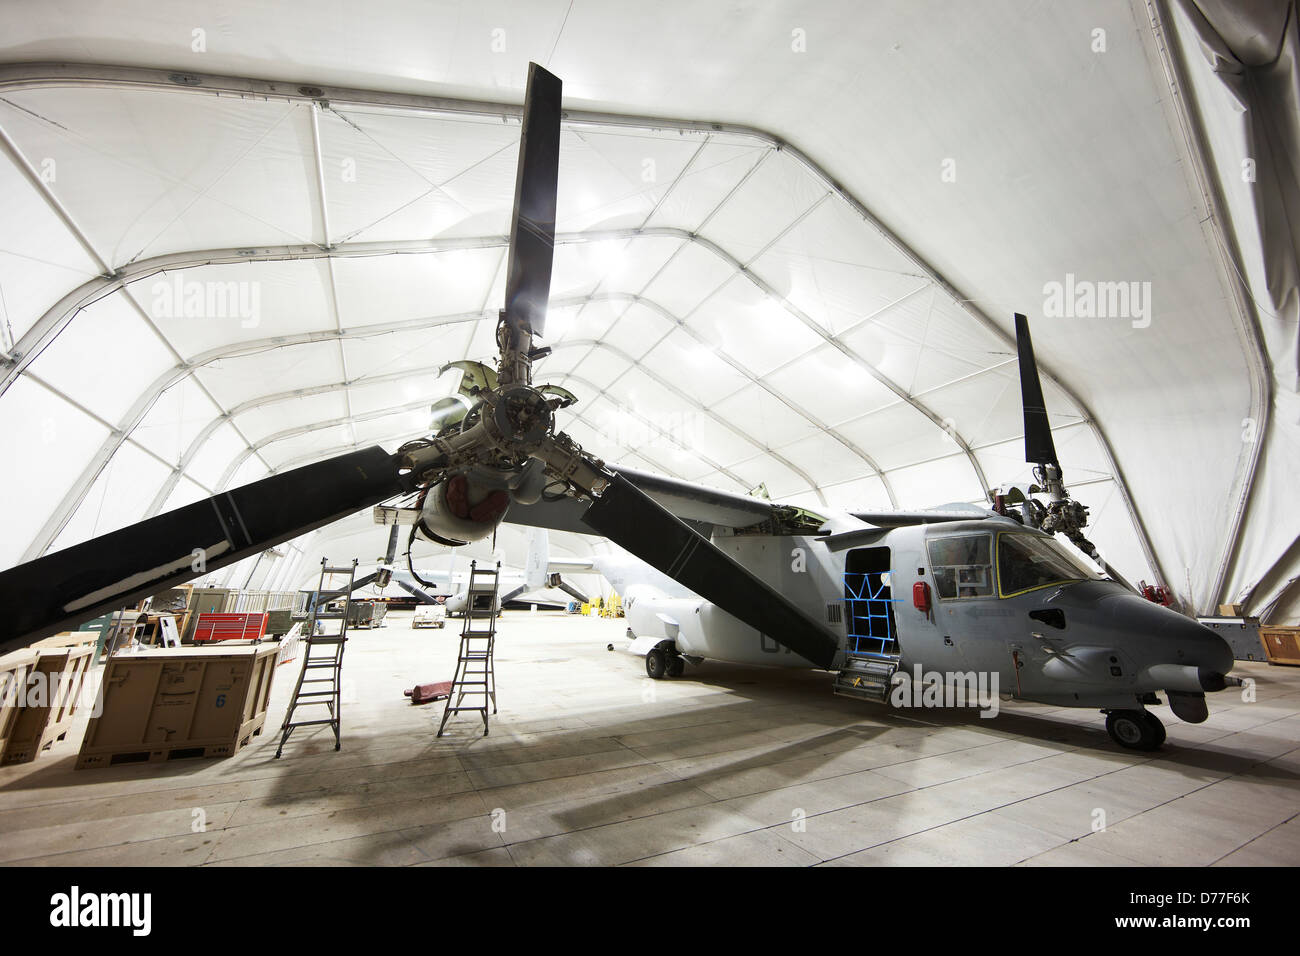 United States Marine Corps MV-22 in expeditionary hangar maintenance Camp Bastion Helmand Province Afghanistan Stock Photo